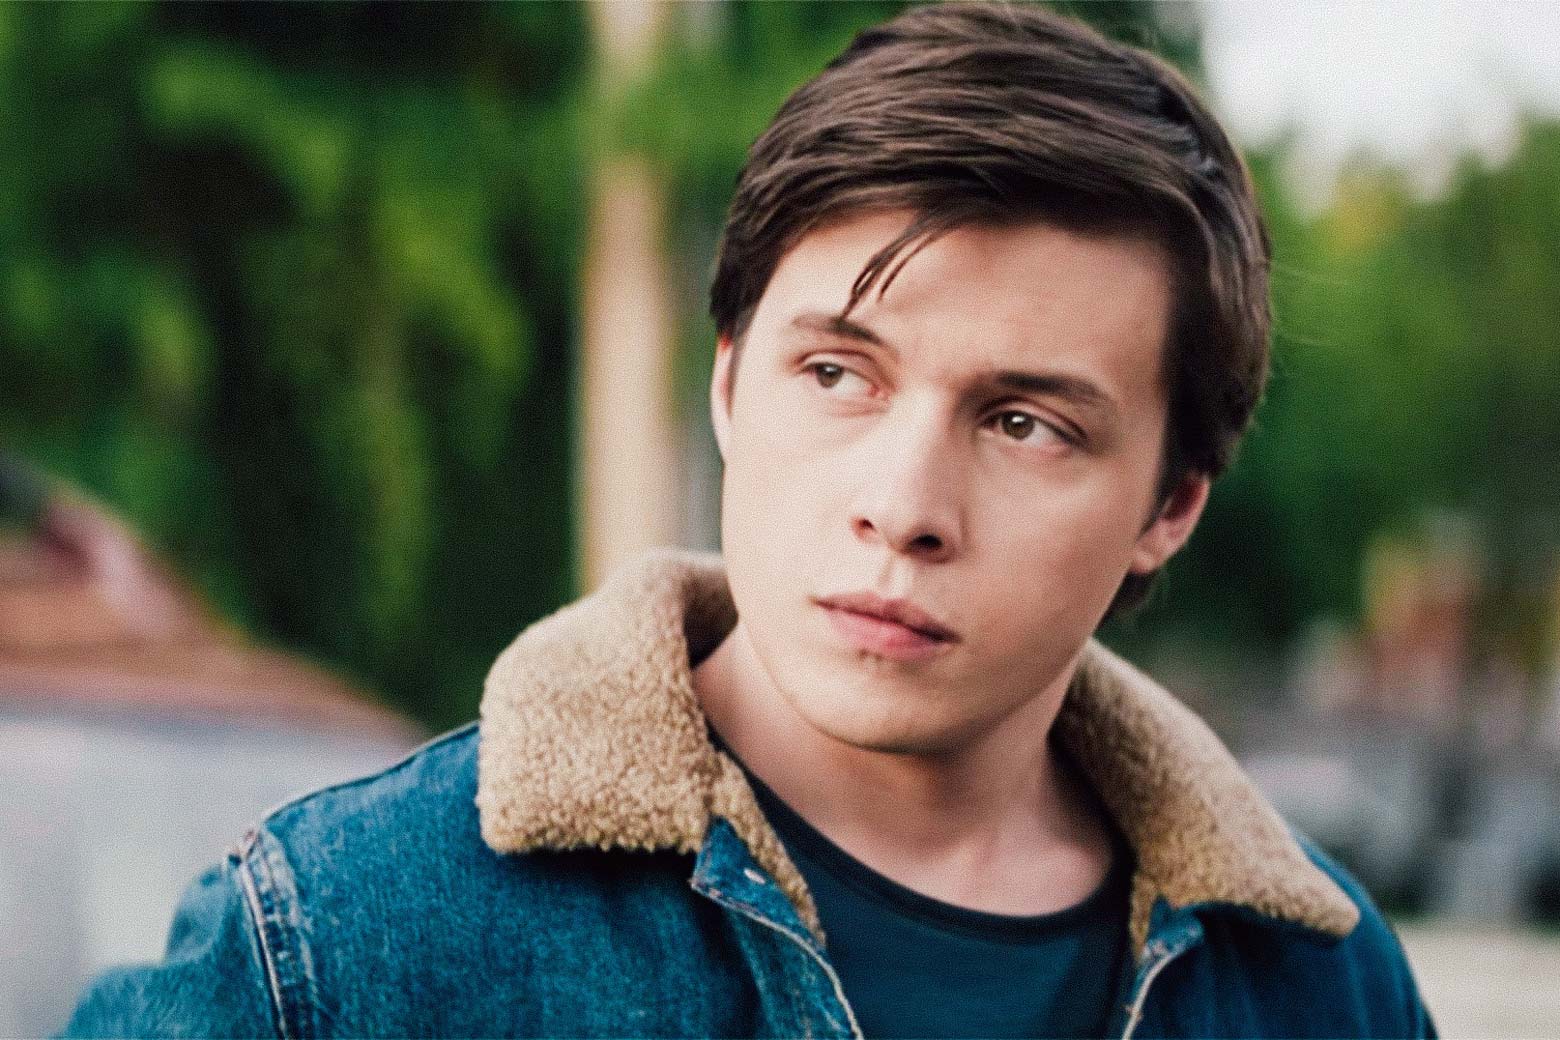 Love Simon A New Film About Gay Coming Out Reviewed 